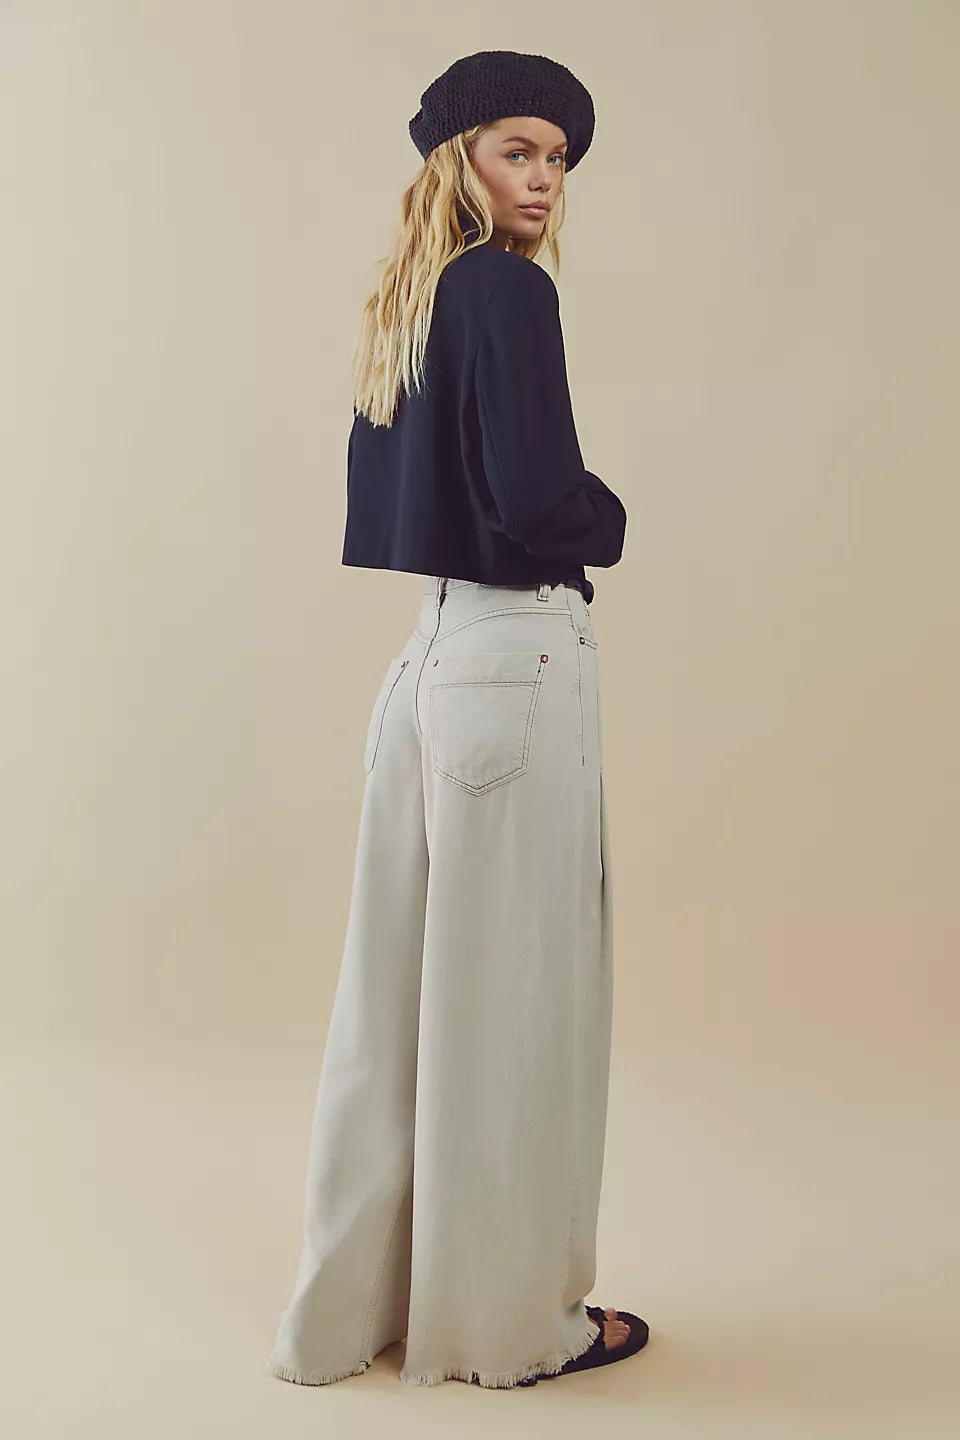 Free People | Old West Slouchy Jeans | Mushroom - Poppy and Stella